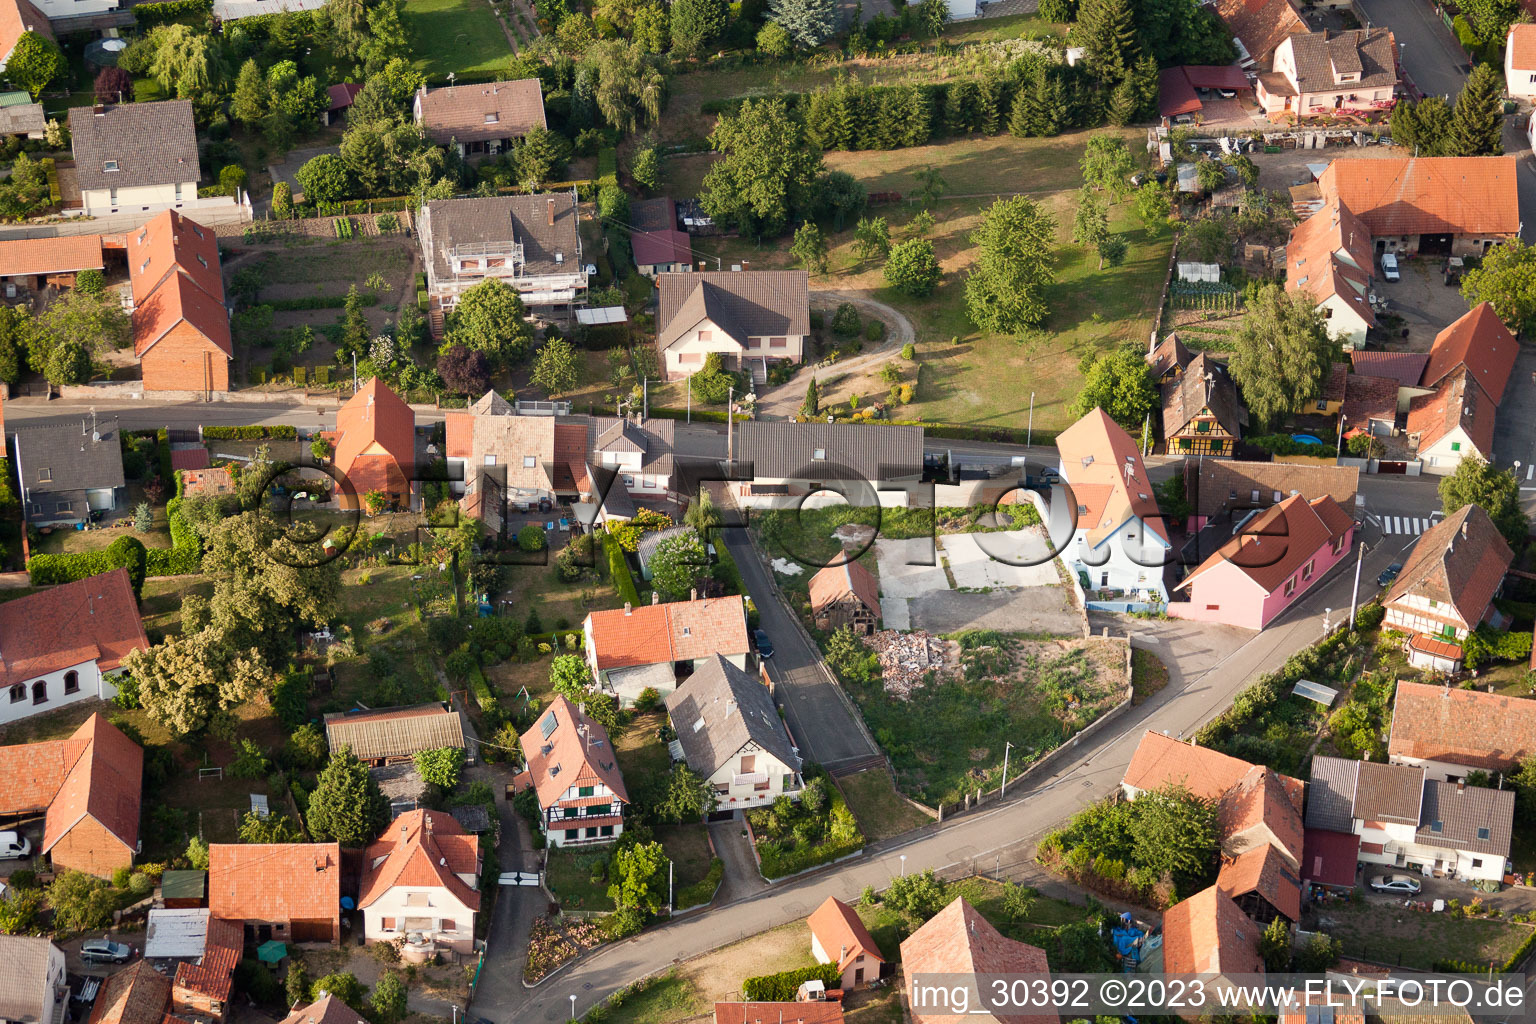 Bischwiller in the state Bas-Rhin, France out of the air